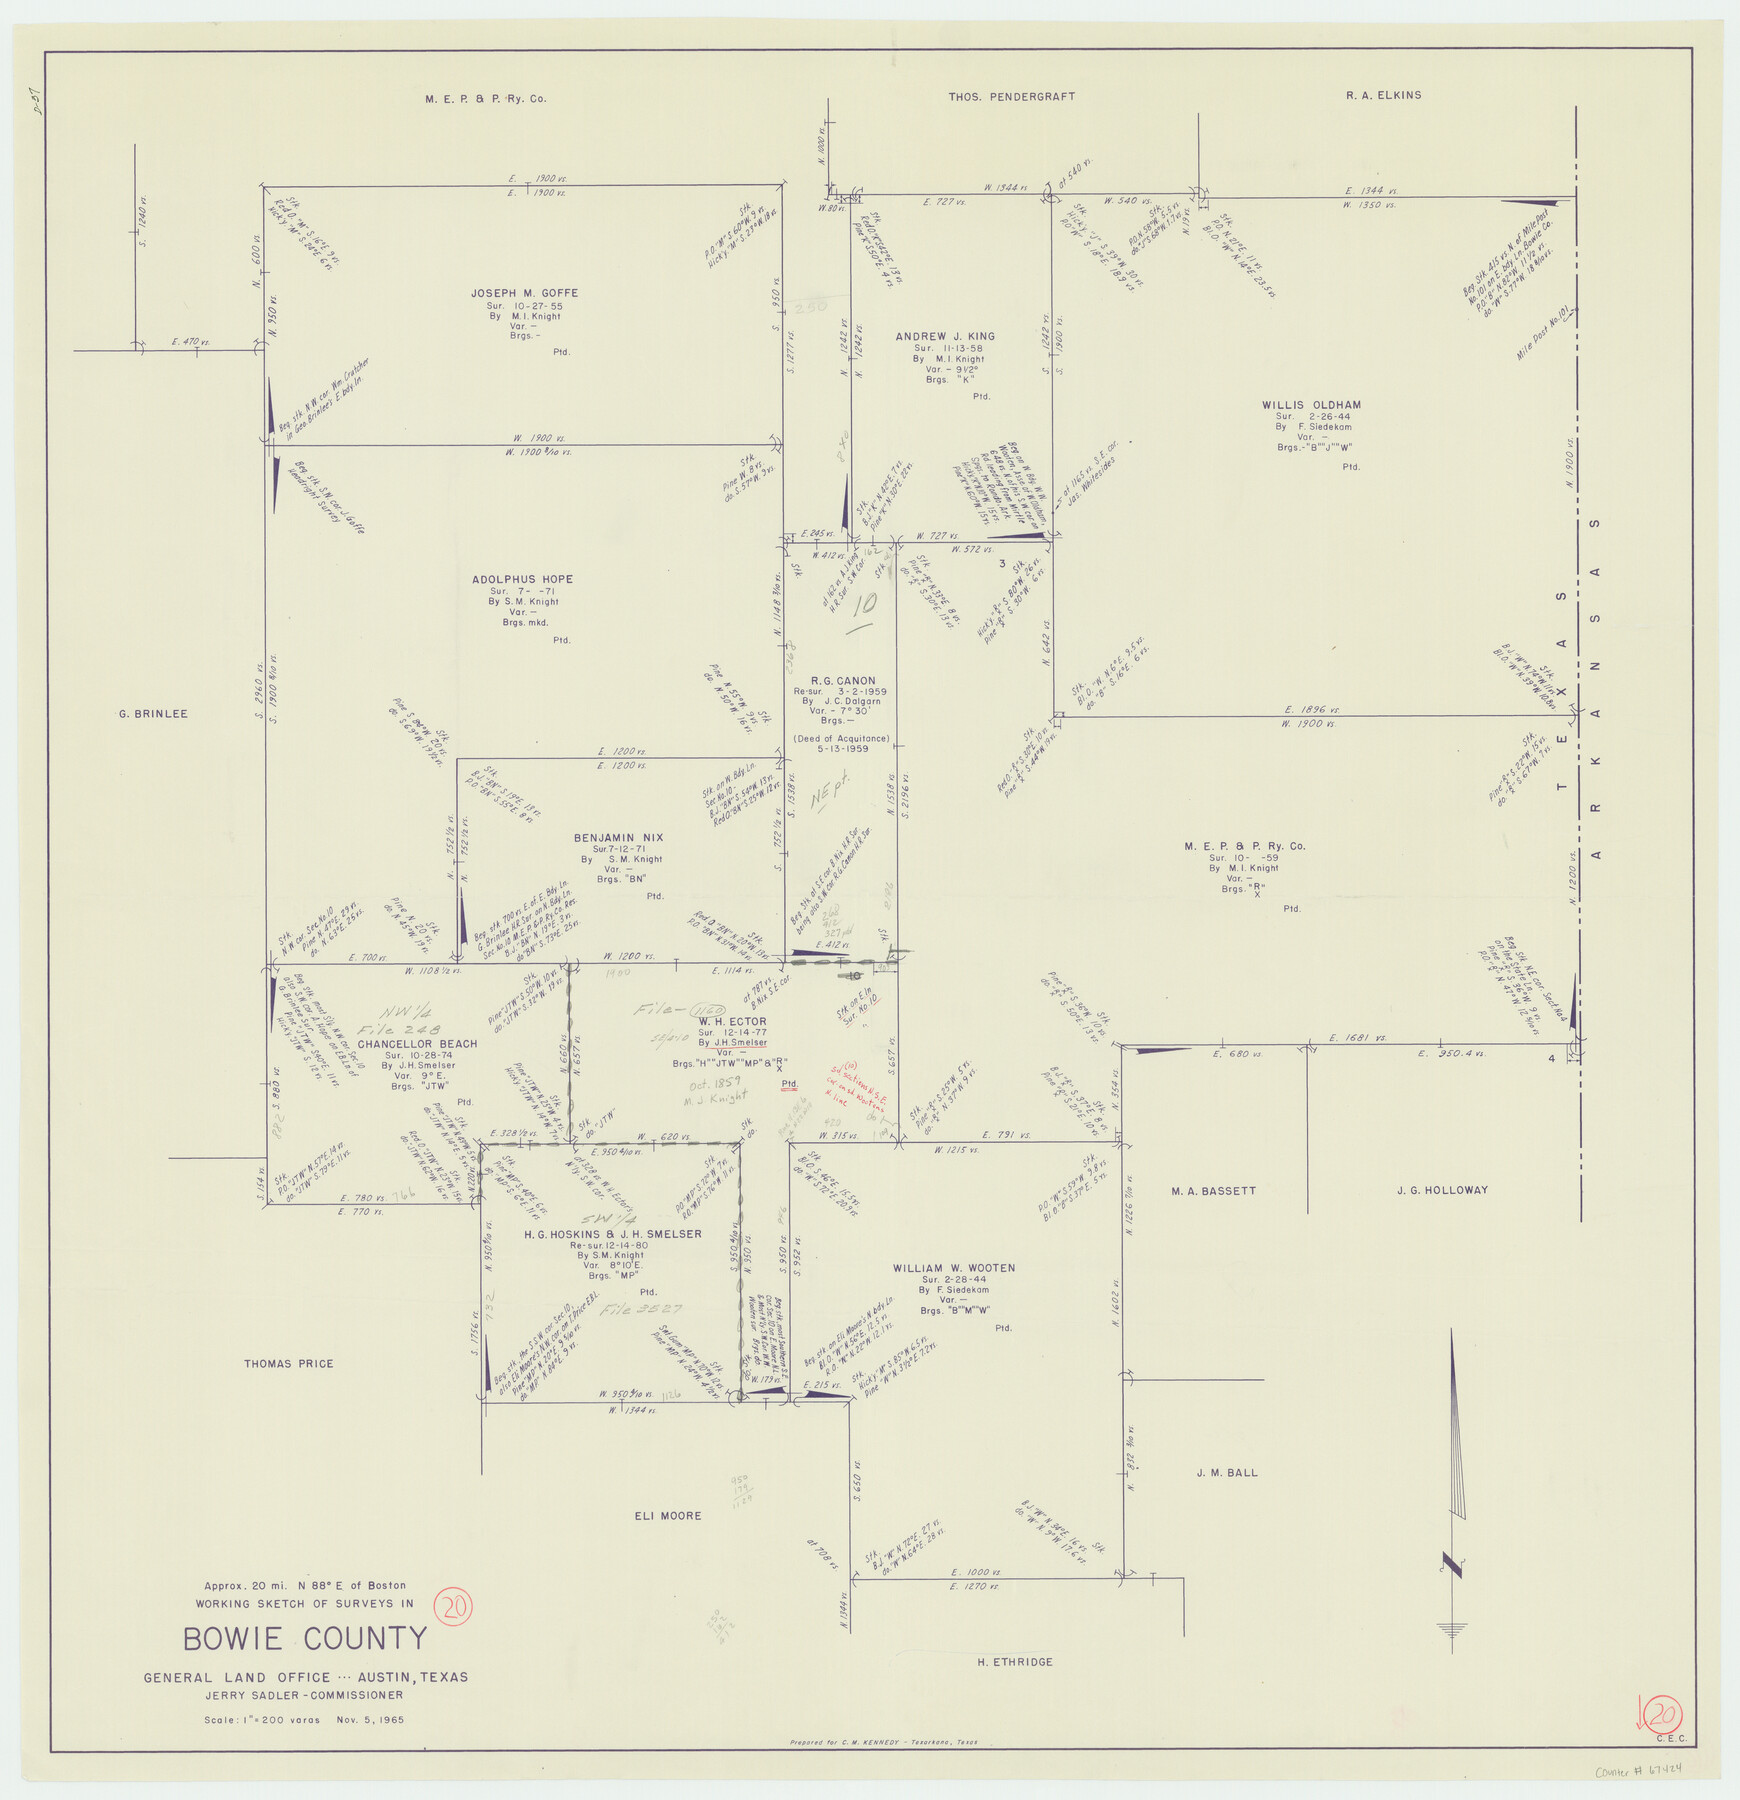 67424, Bowie County Working Sketch 20, General Map Collection